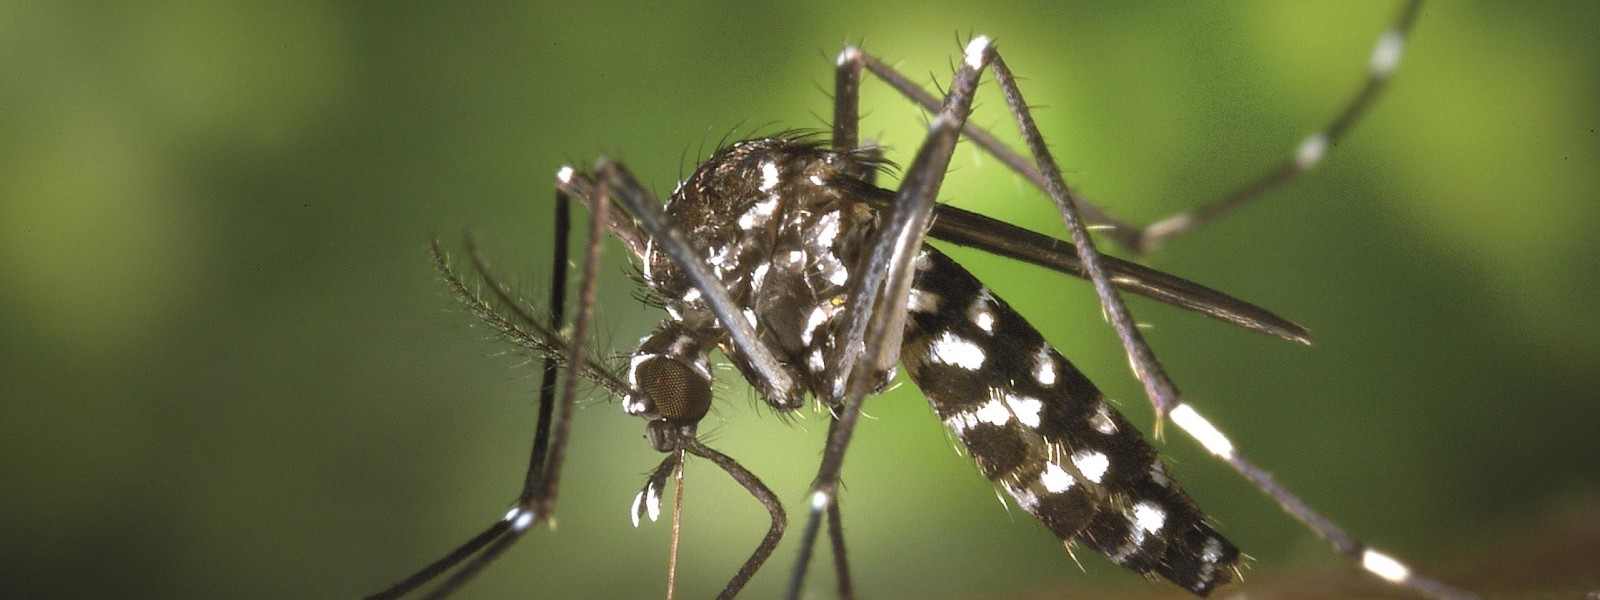 DENGUE ON THE RISE: 7,317 patients reported so far this year